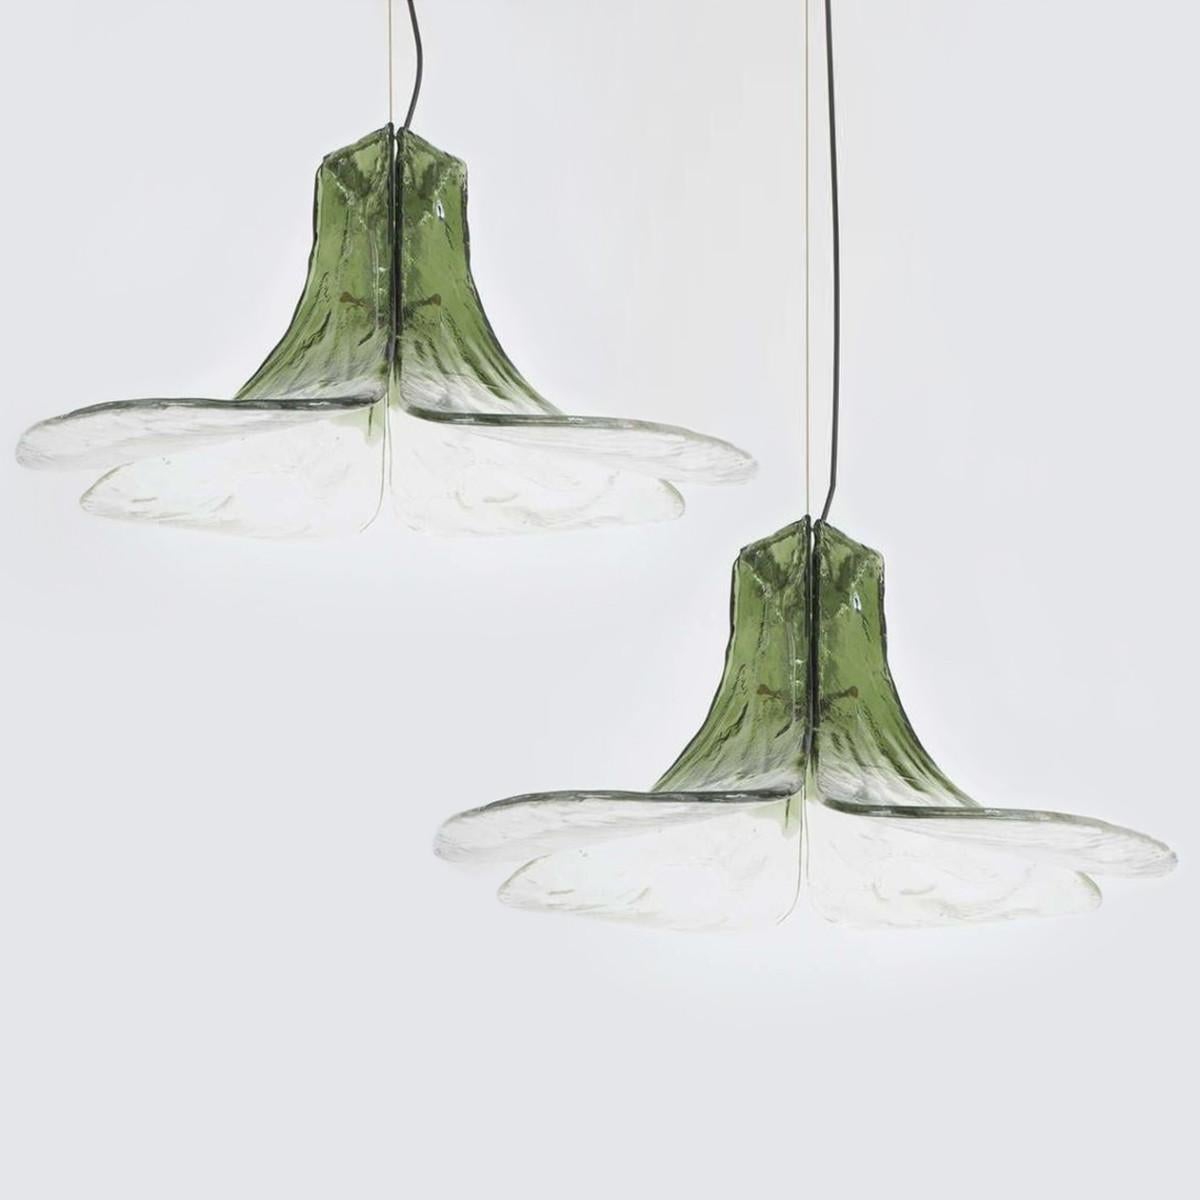 A pair of exceptional pendant lamps model LS185 by Carlo Nason for Mazzega.
Four crystal clear and green leaves compose this beautiful piece made in thick handmade Murano glass.

Measures: H 16.93” (43 cm), D 23.62